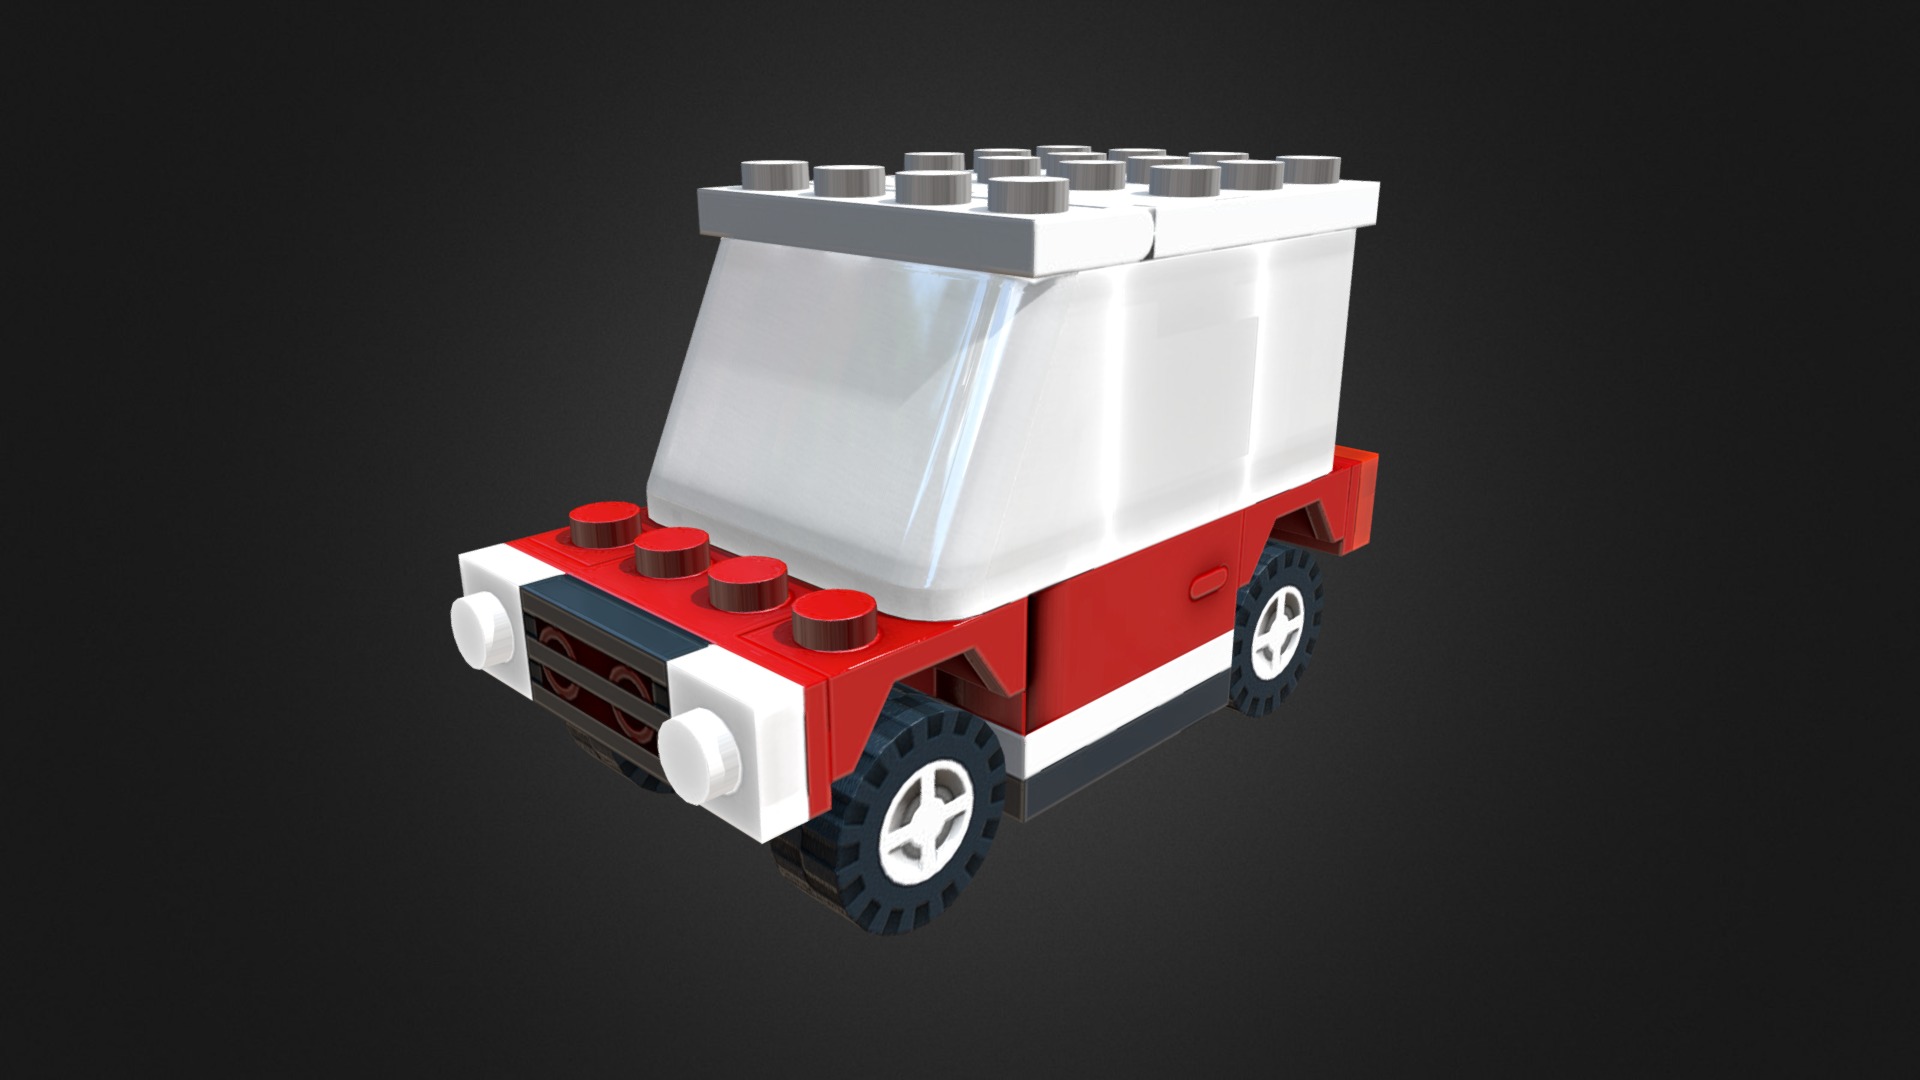 3D model 1489 Red Car - This is a 3D model of the 1489 Red Car. The 3D model is about a toy fire truck.